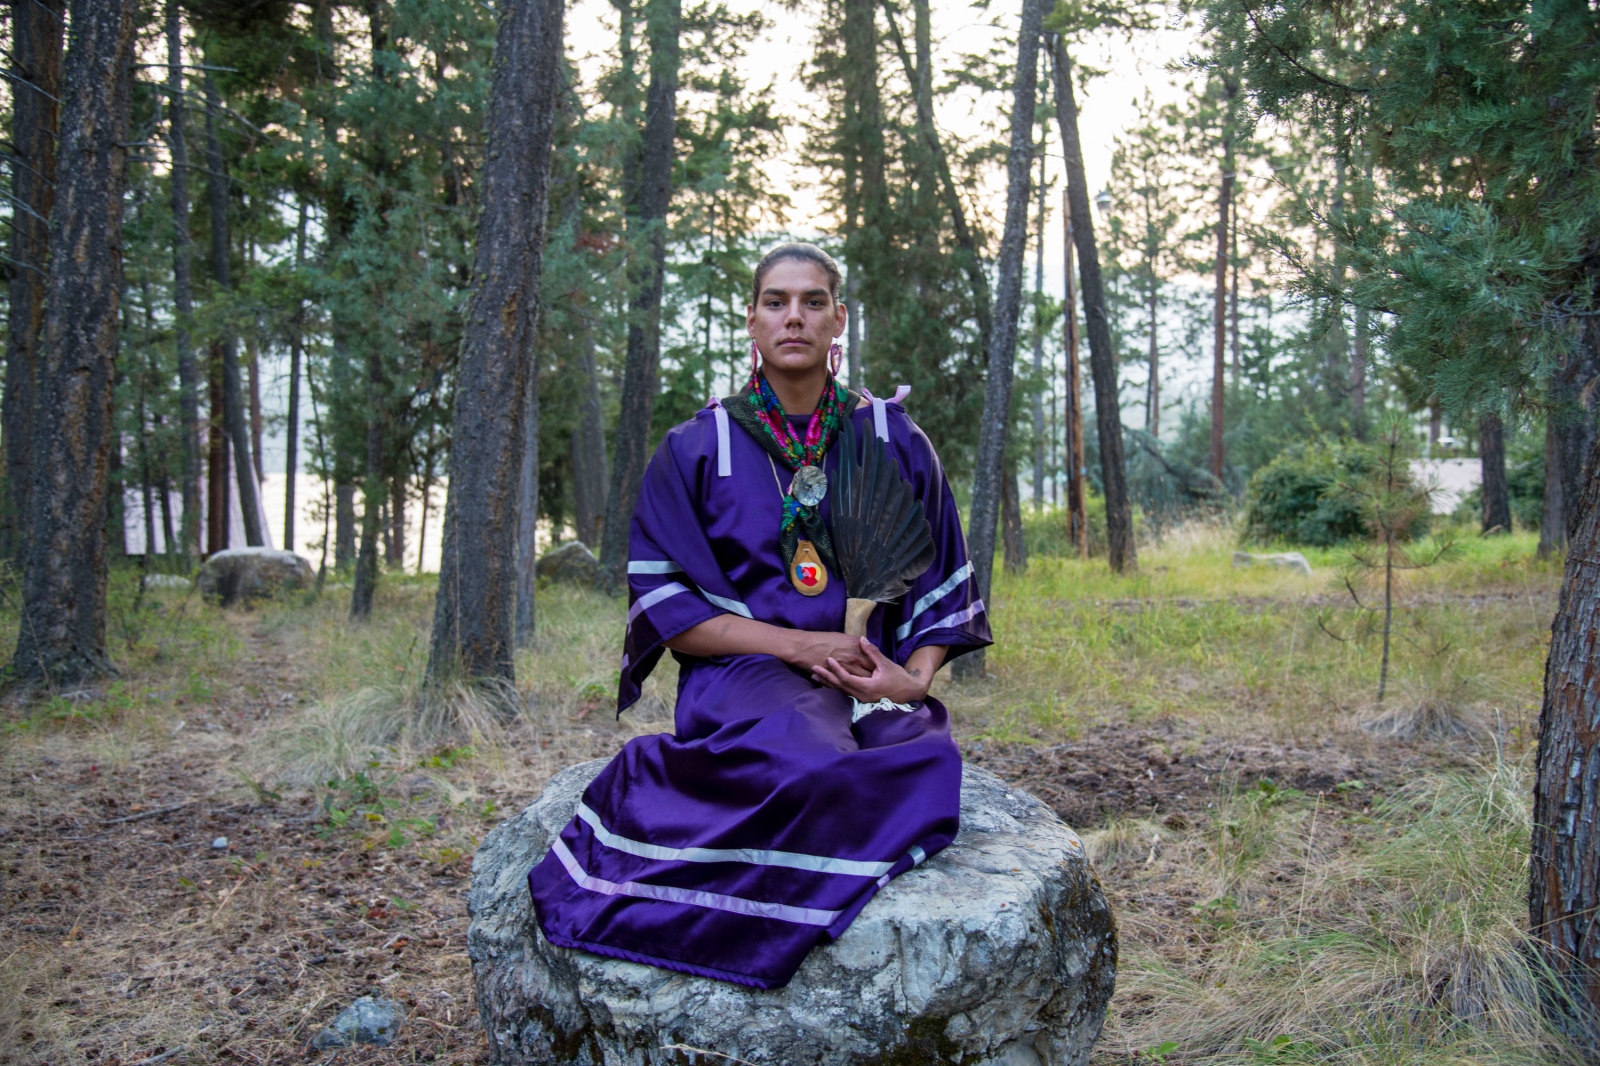 Two Spirits - Gender Fluidity in Native American Culture